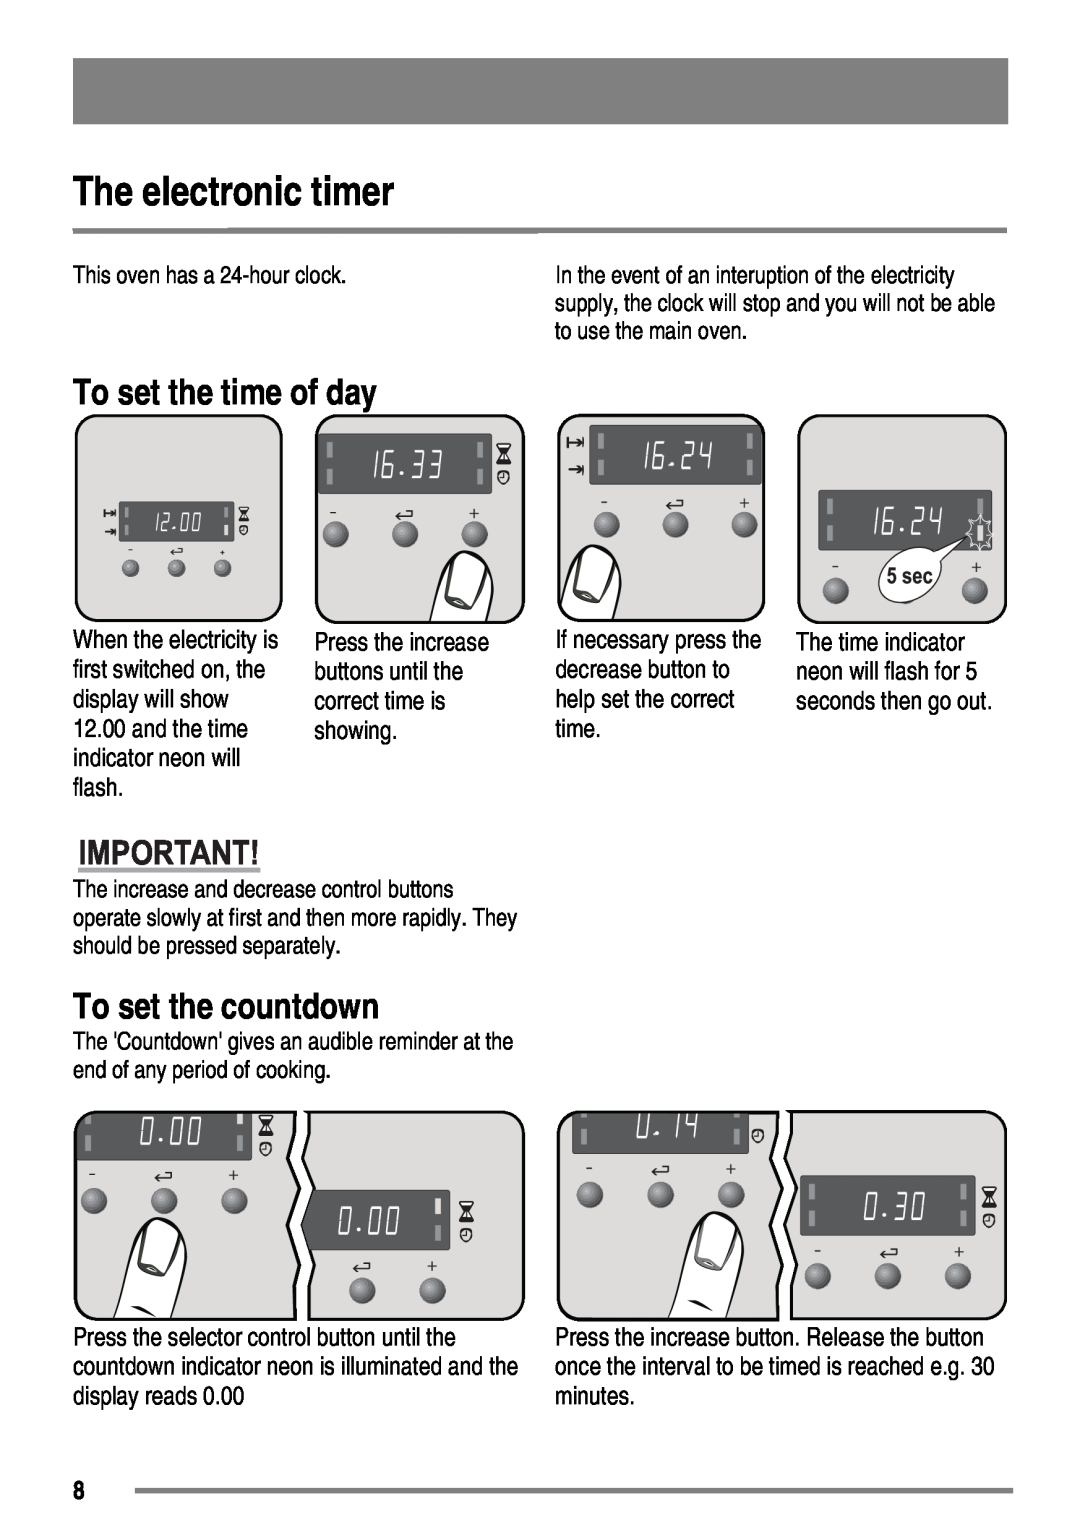 Zanussi ZKM6040 user manual The electronic timer, To set the time of day, To set the countdown 